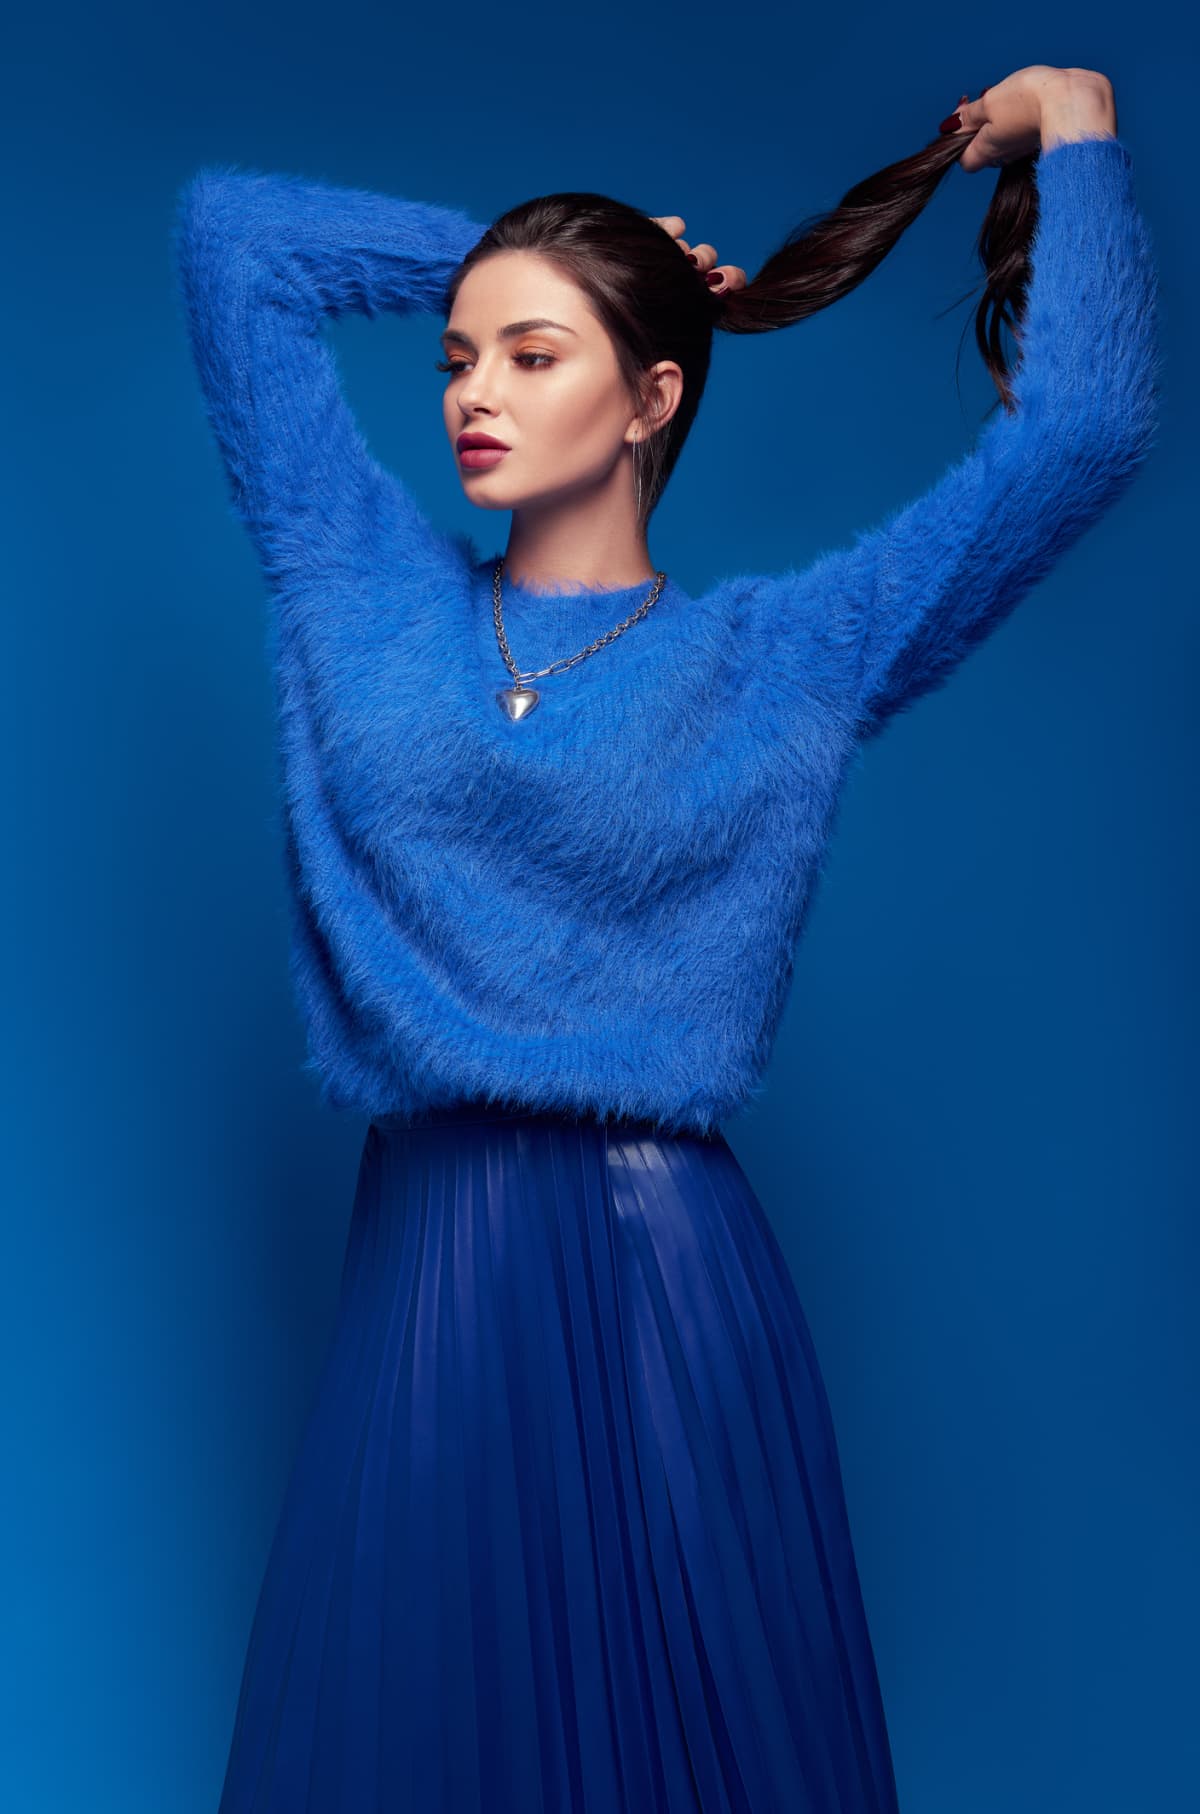 Studio fashion: lovely young woman dressed in blue skirt and sweater.